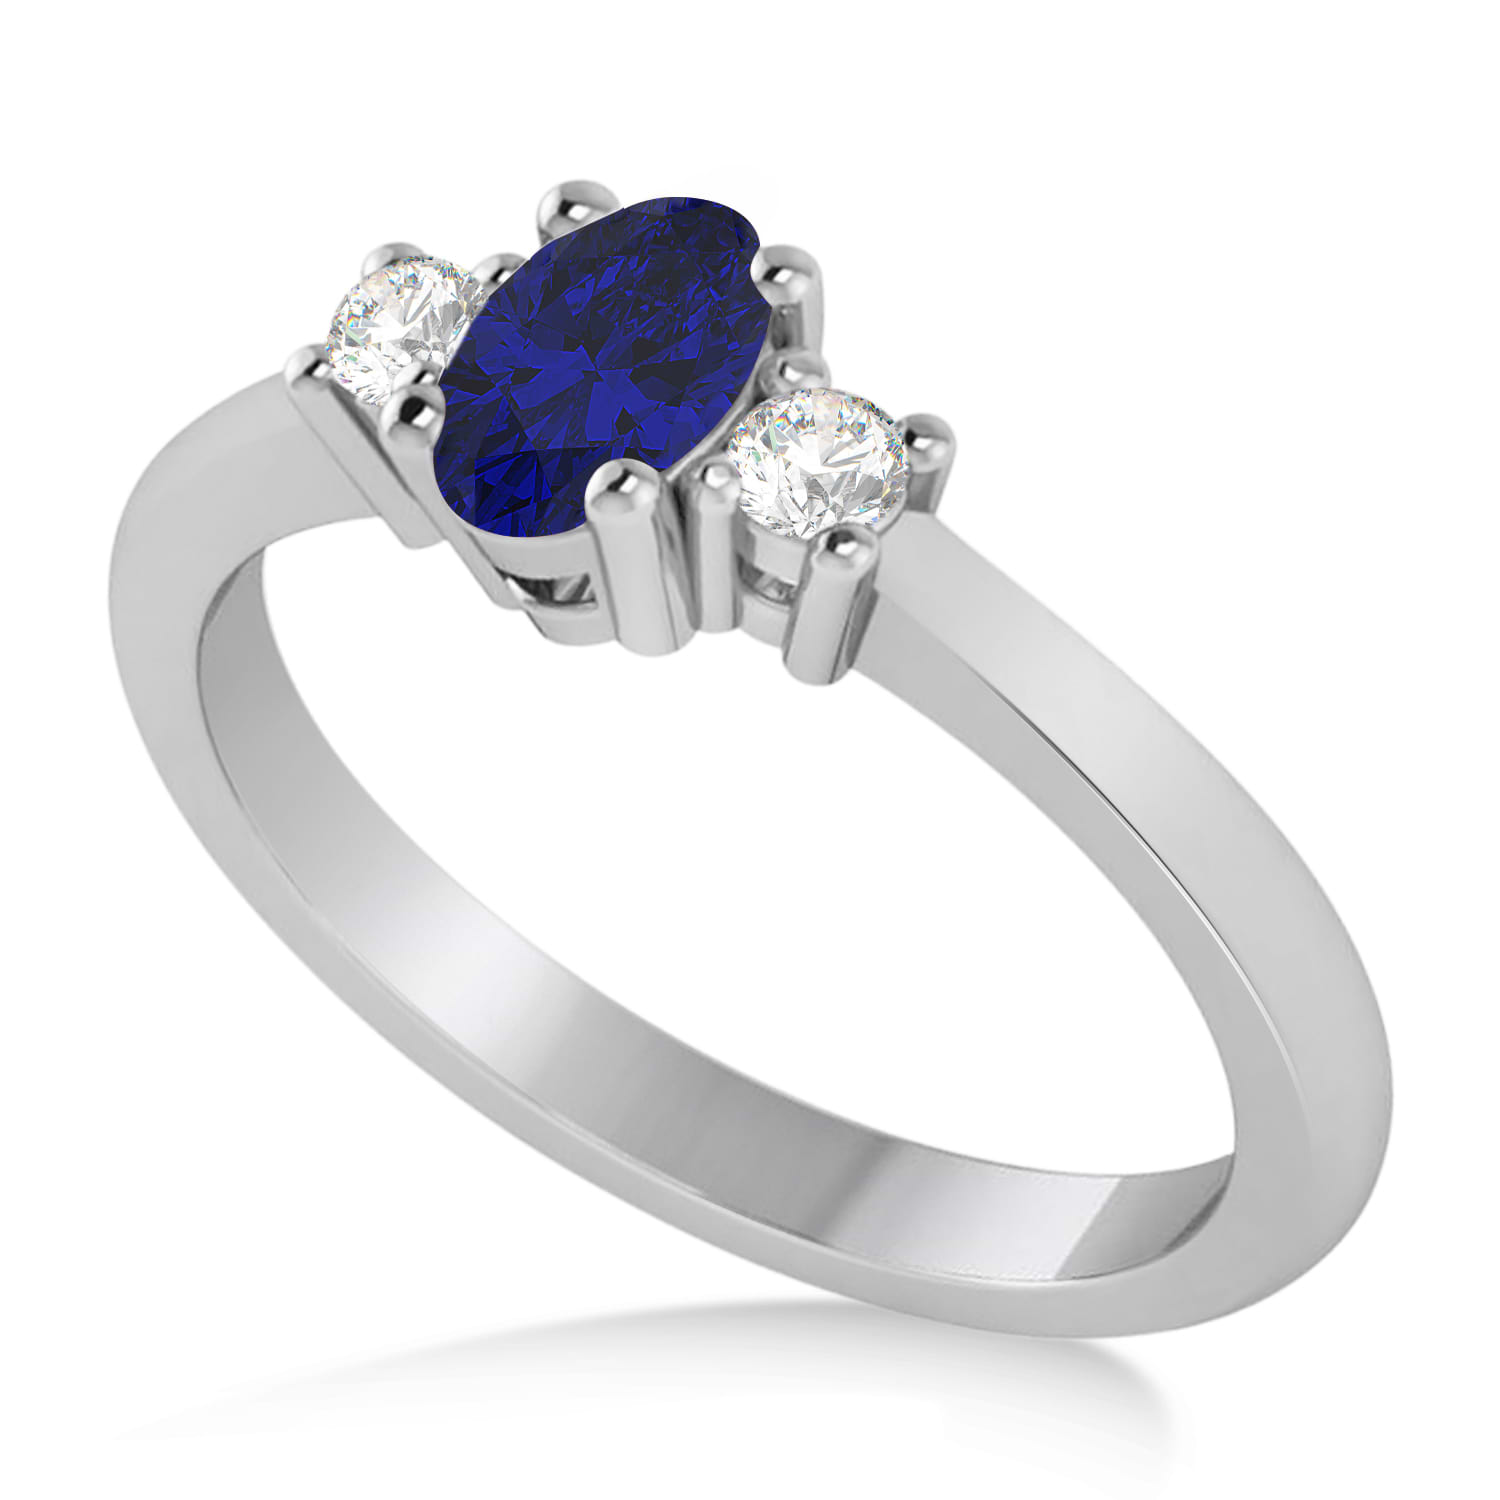 Small Oval Blue Sapphire & Diamond Three-Stone Engagement Ring 14k White Gold (0.60ct)